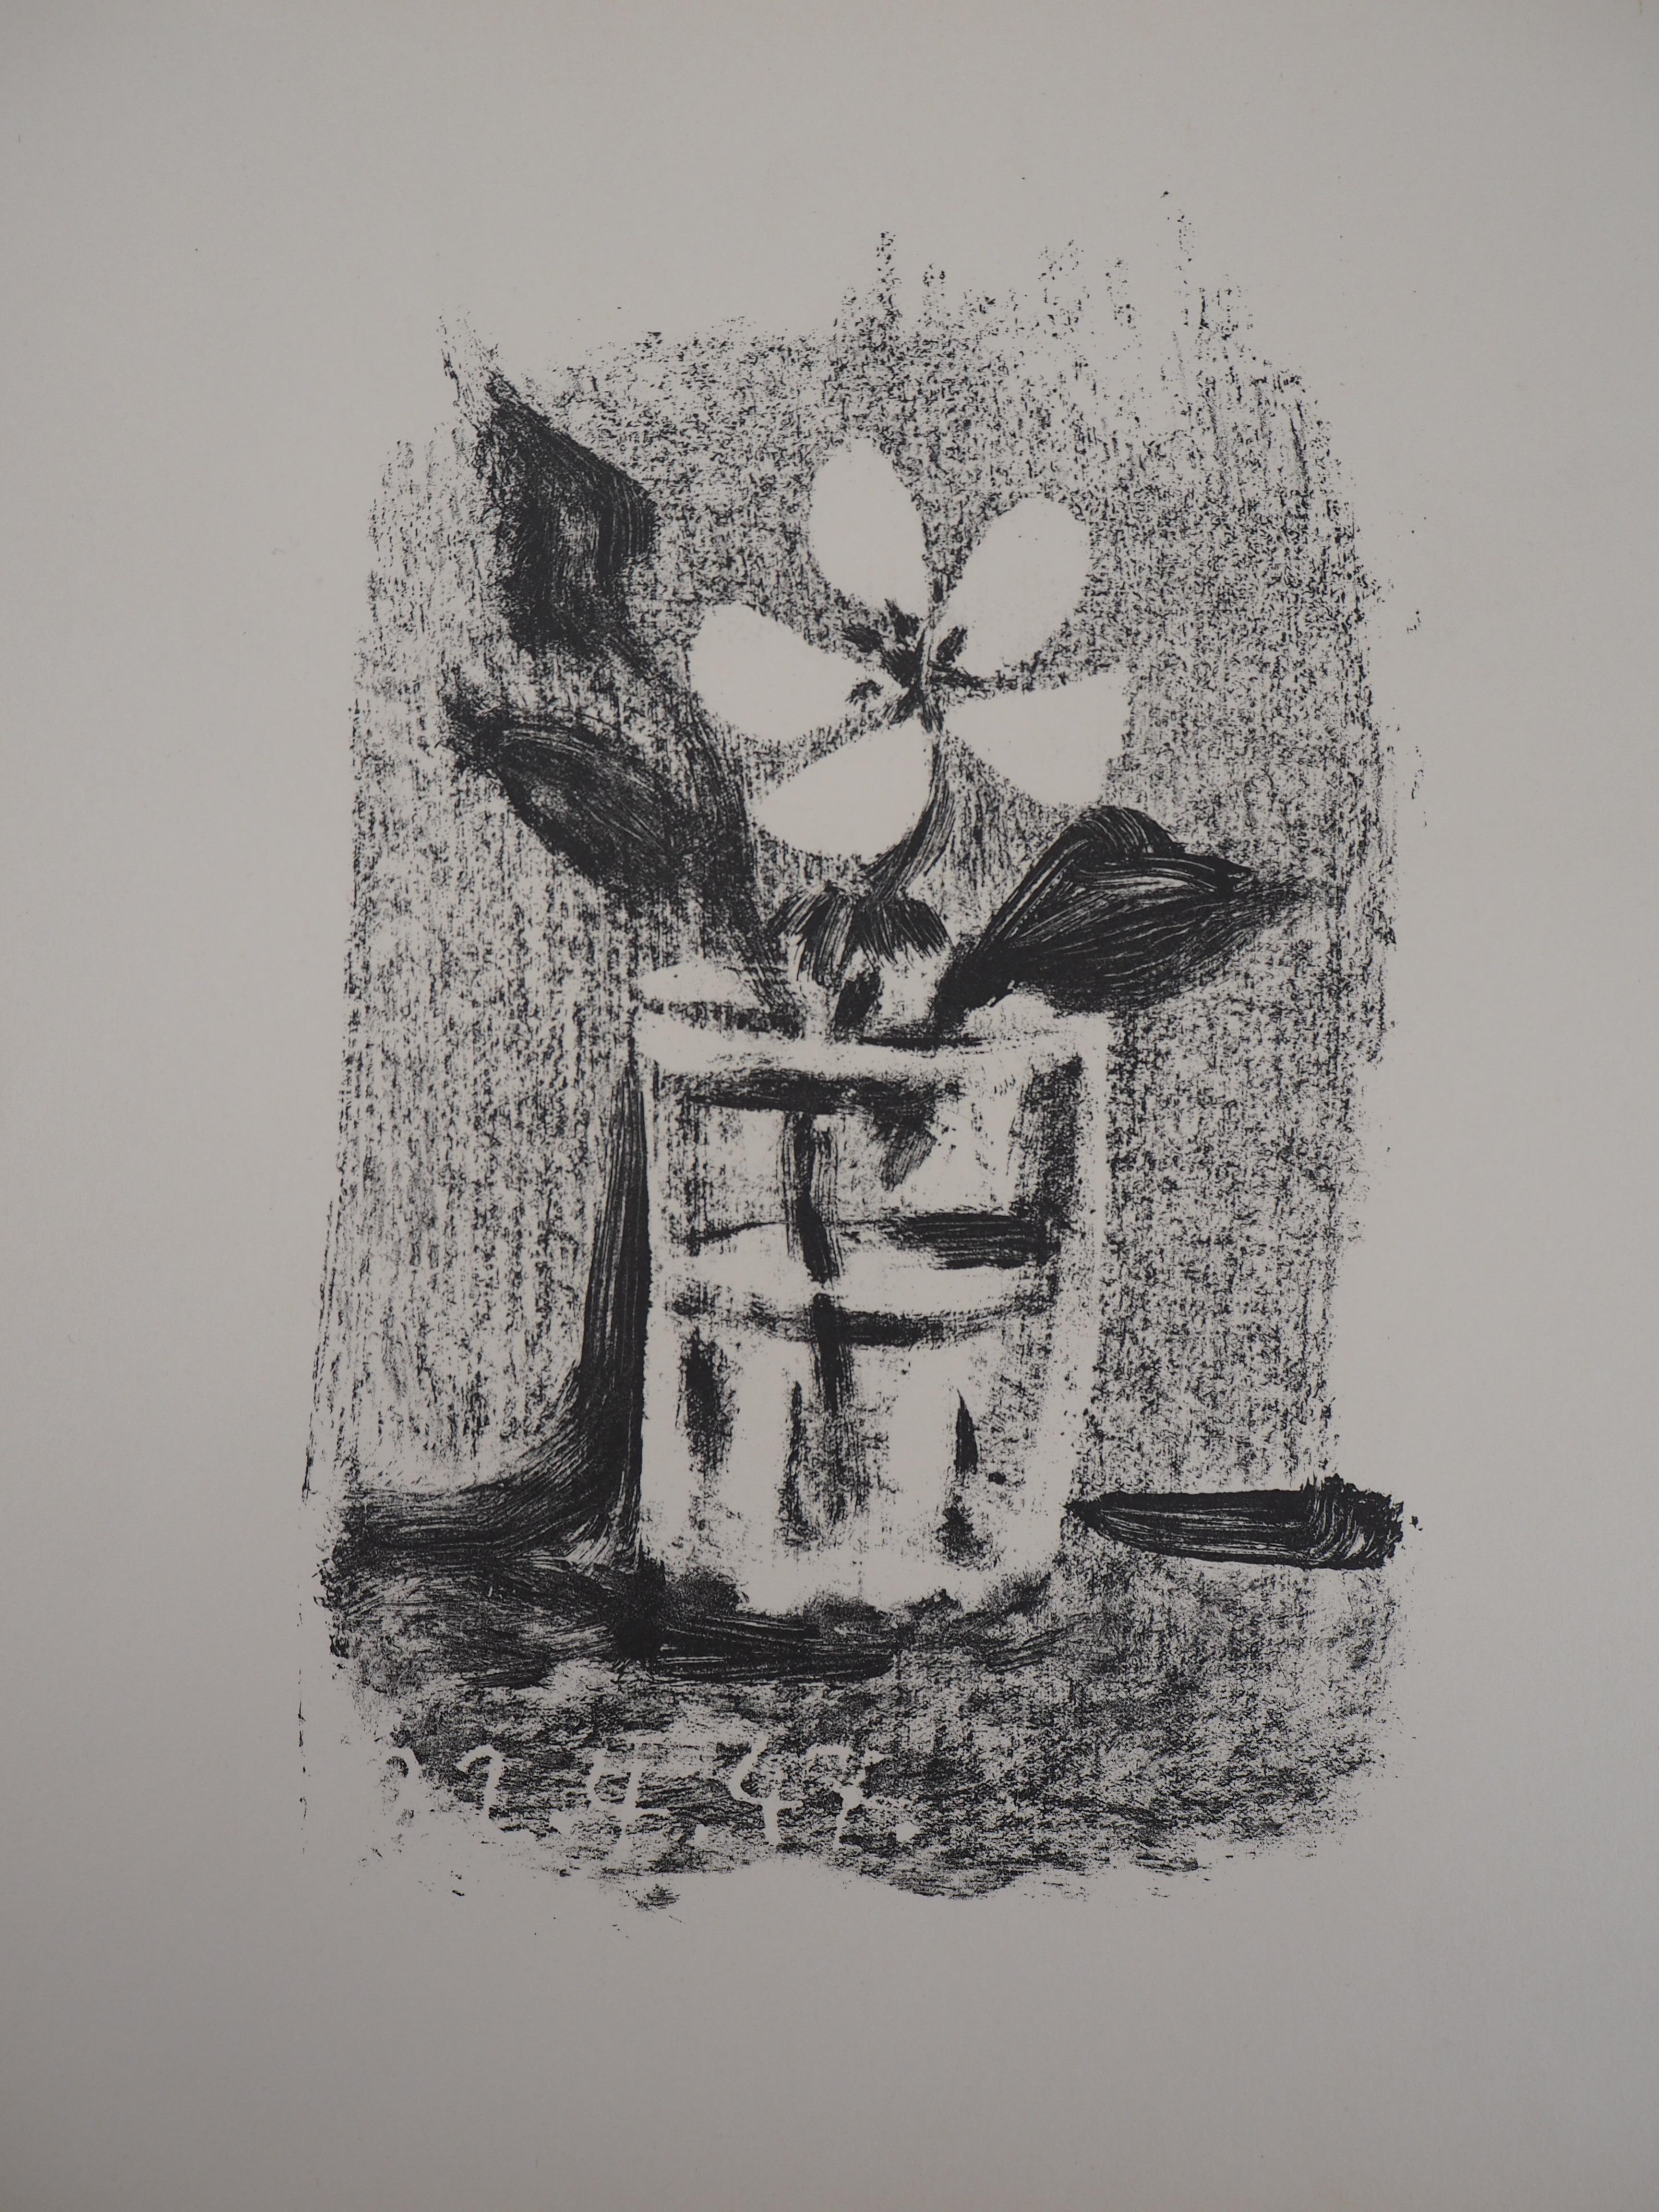 Pablo Picasso Still-Life Print - Flowers in a Glass - Original lithograph - Mourlot #98